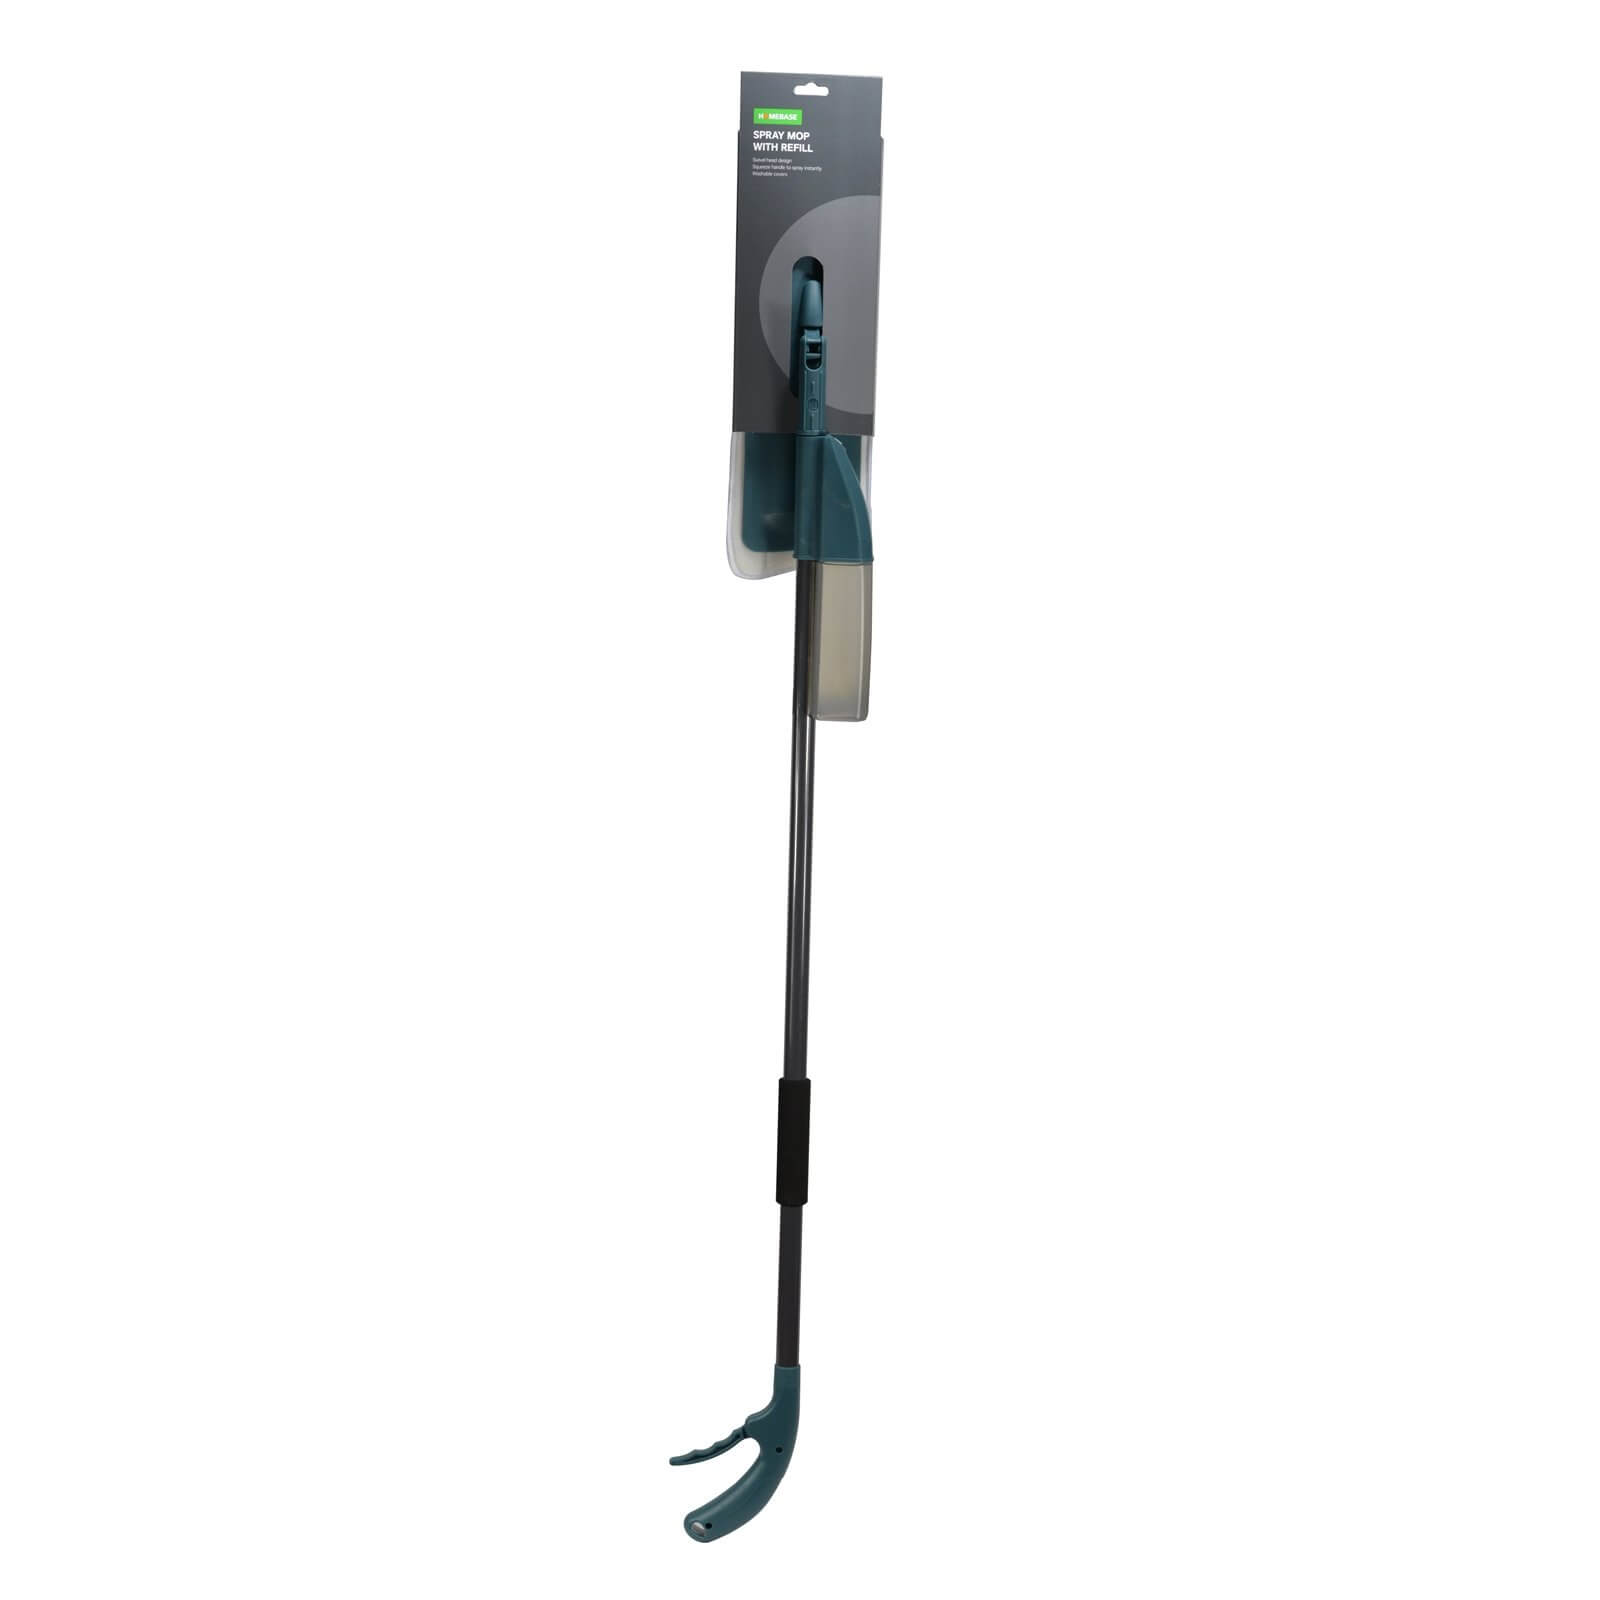 Spray Mop with Refill